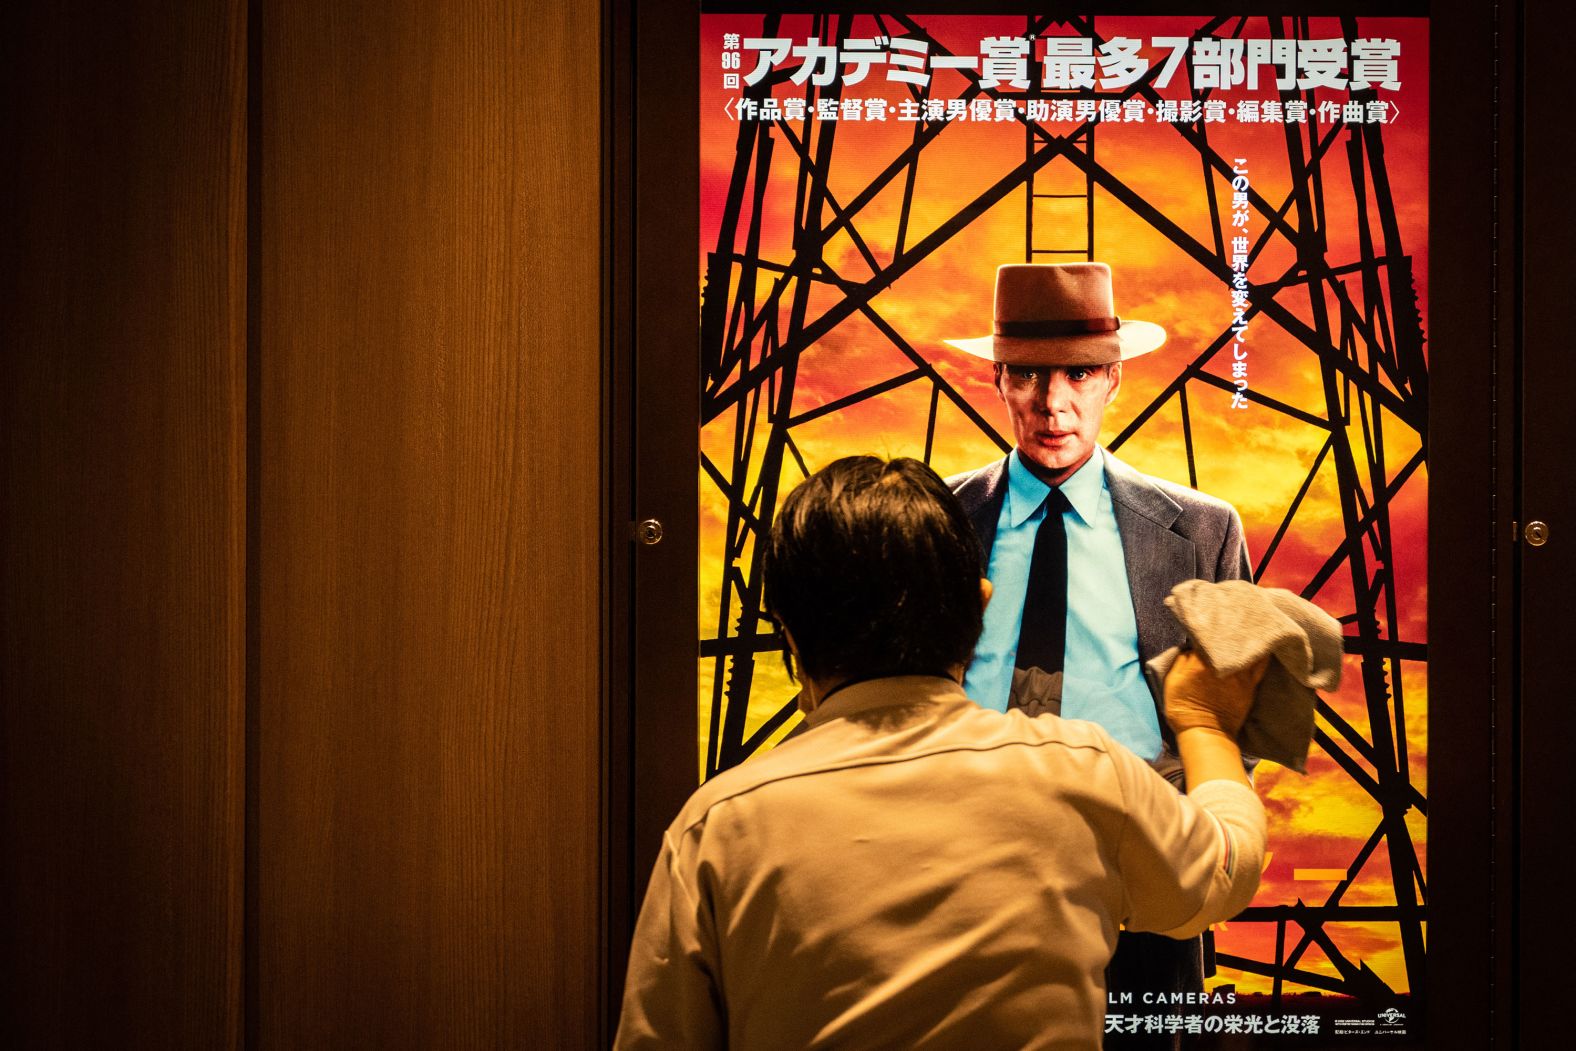 A worker in Tokyo cleans a screen showing an "Oppenheimer" movie poster on Friday, March 29. The Academy Award-winning film <a href="index.php?page=&url=https%3A%2F%2Fwww.cnn.com%2F2024%2F04%2F01%2Fstyle%2Fjapan-oppenheimer-release-nuclear-intl-hnk%2Findex.html" target="_blank">finally opened in Japan</a>, eight months after its worldwide release, following concerns about how it might be received in the only country that directly experienced the horror of nuclear weapons.